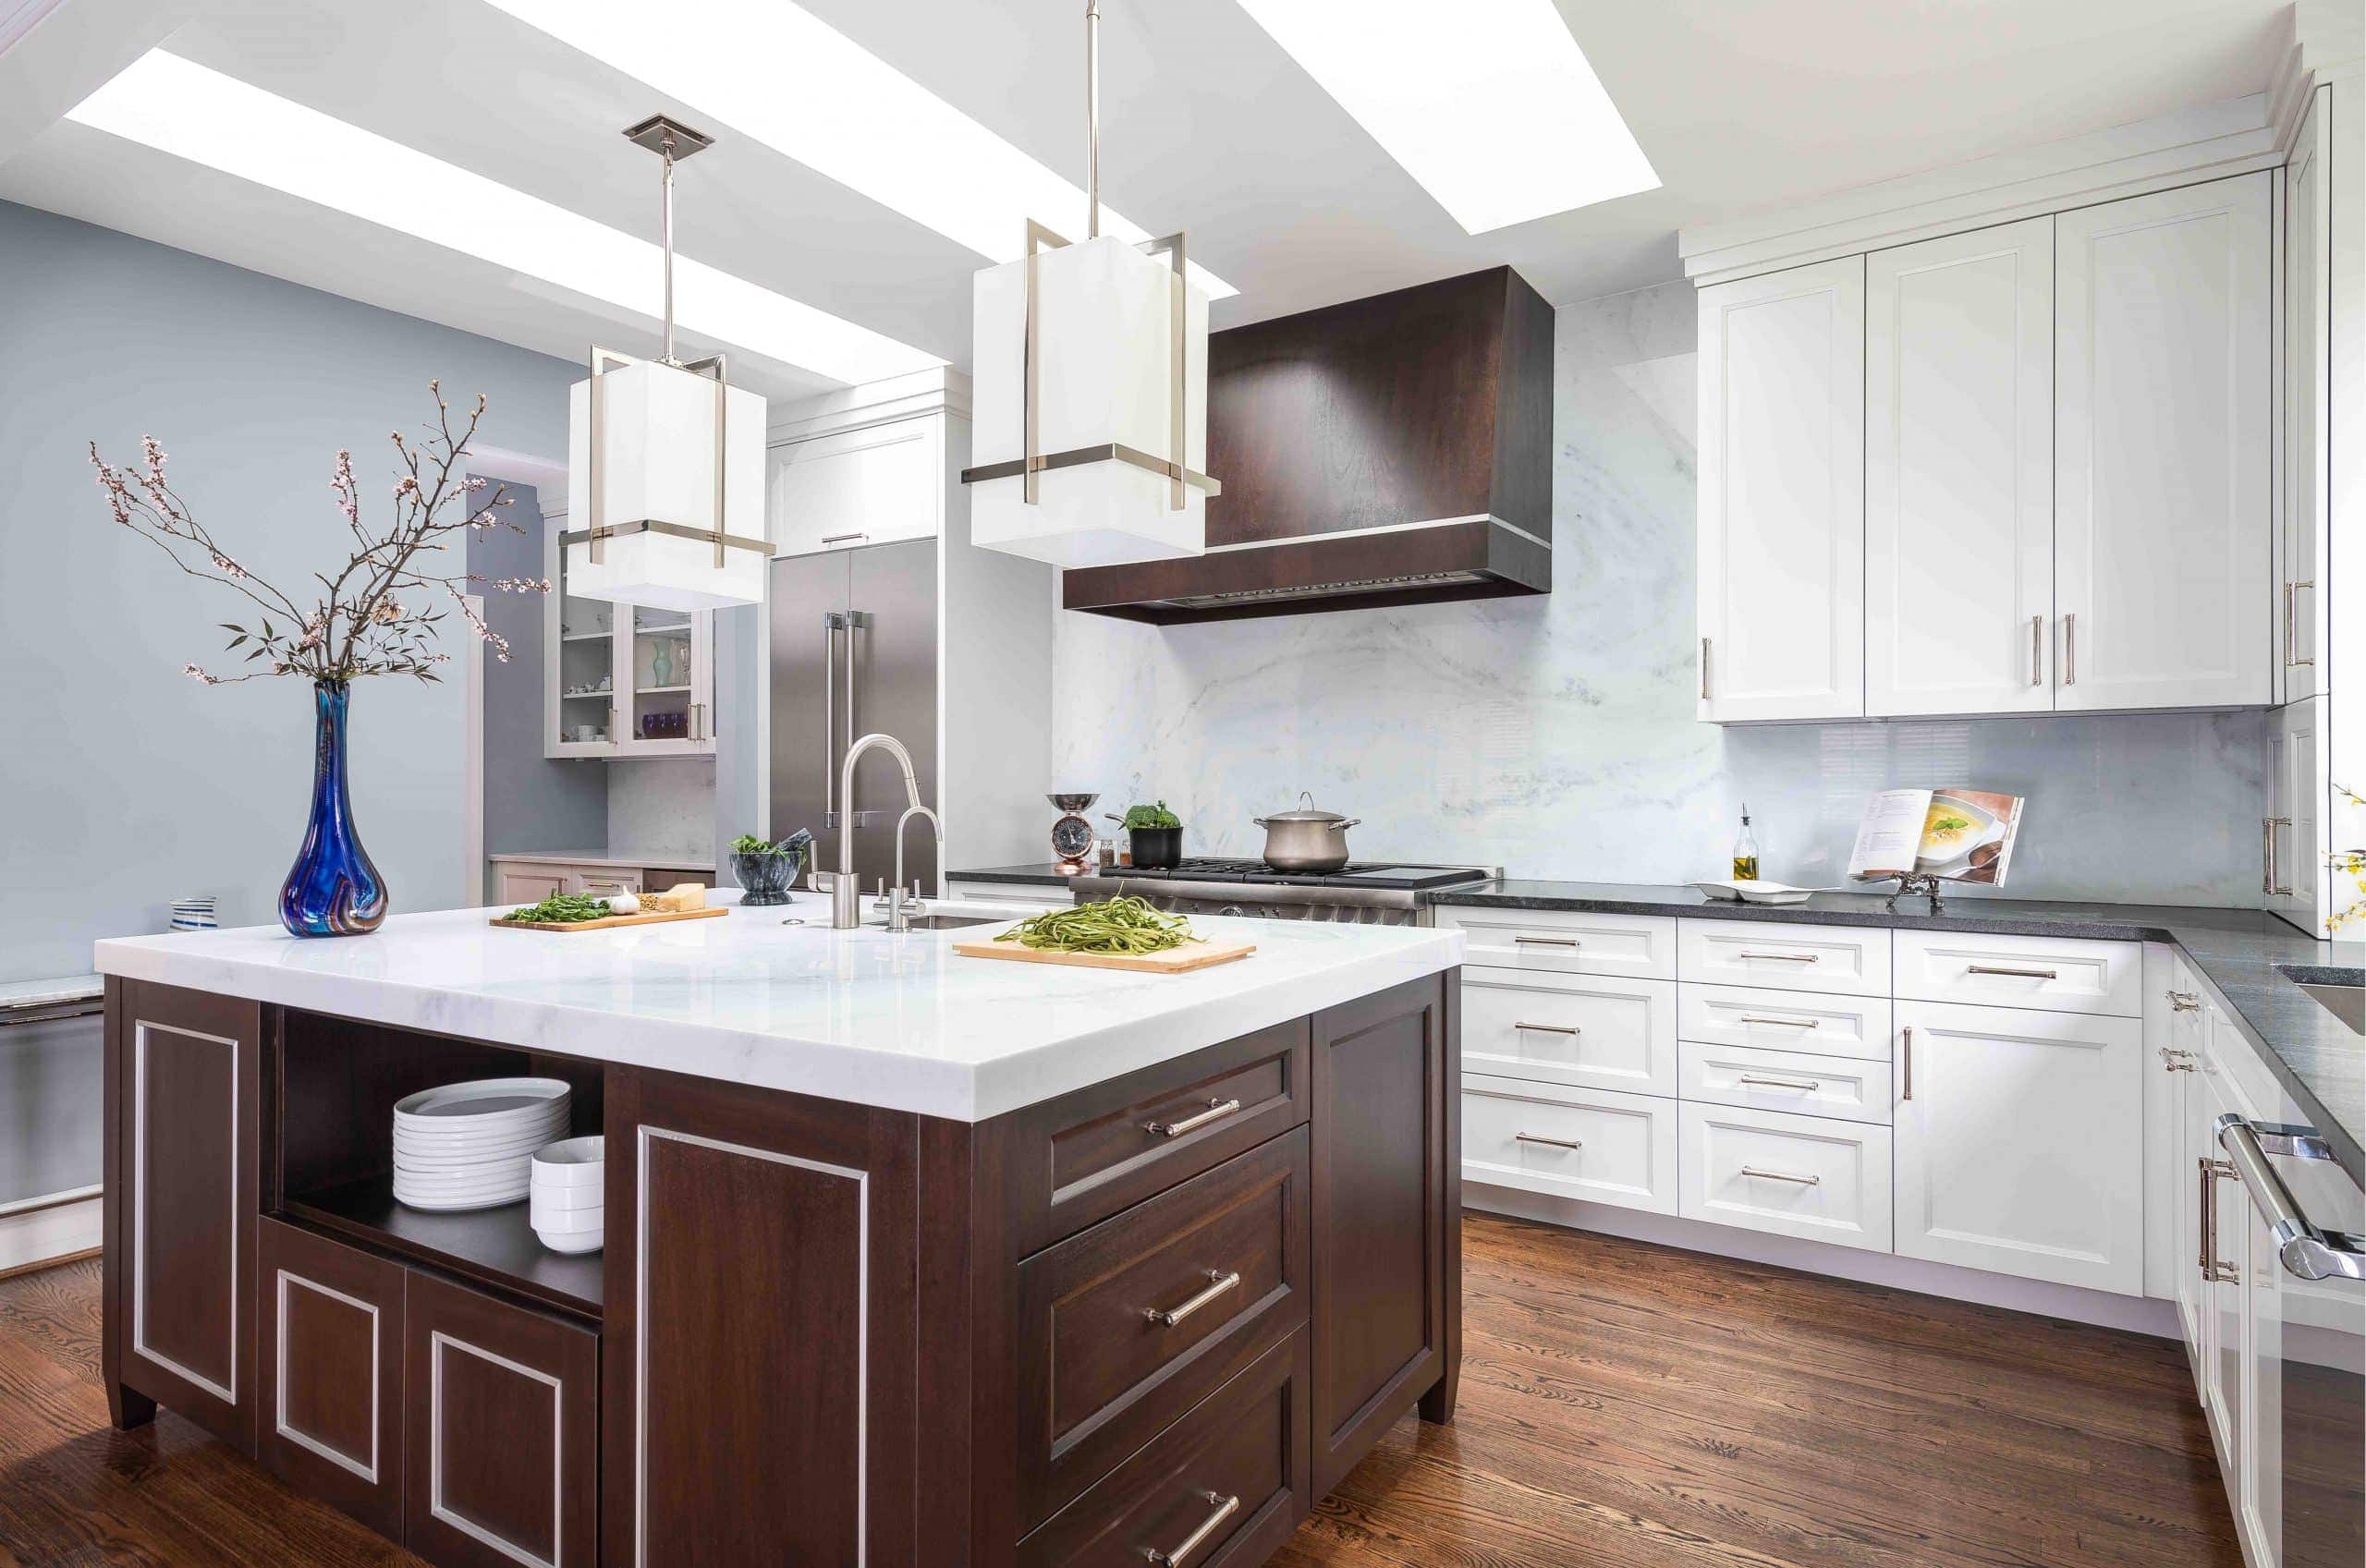 Work with the experts at Jennifer Gilmer Kitchen & Bath, Kitchen Remodeling in Leesburg, Virginia